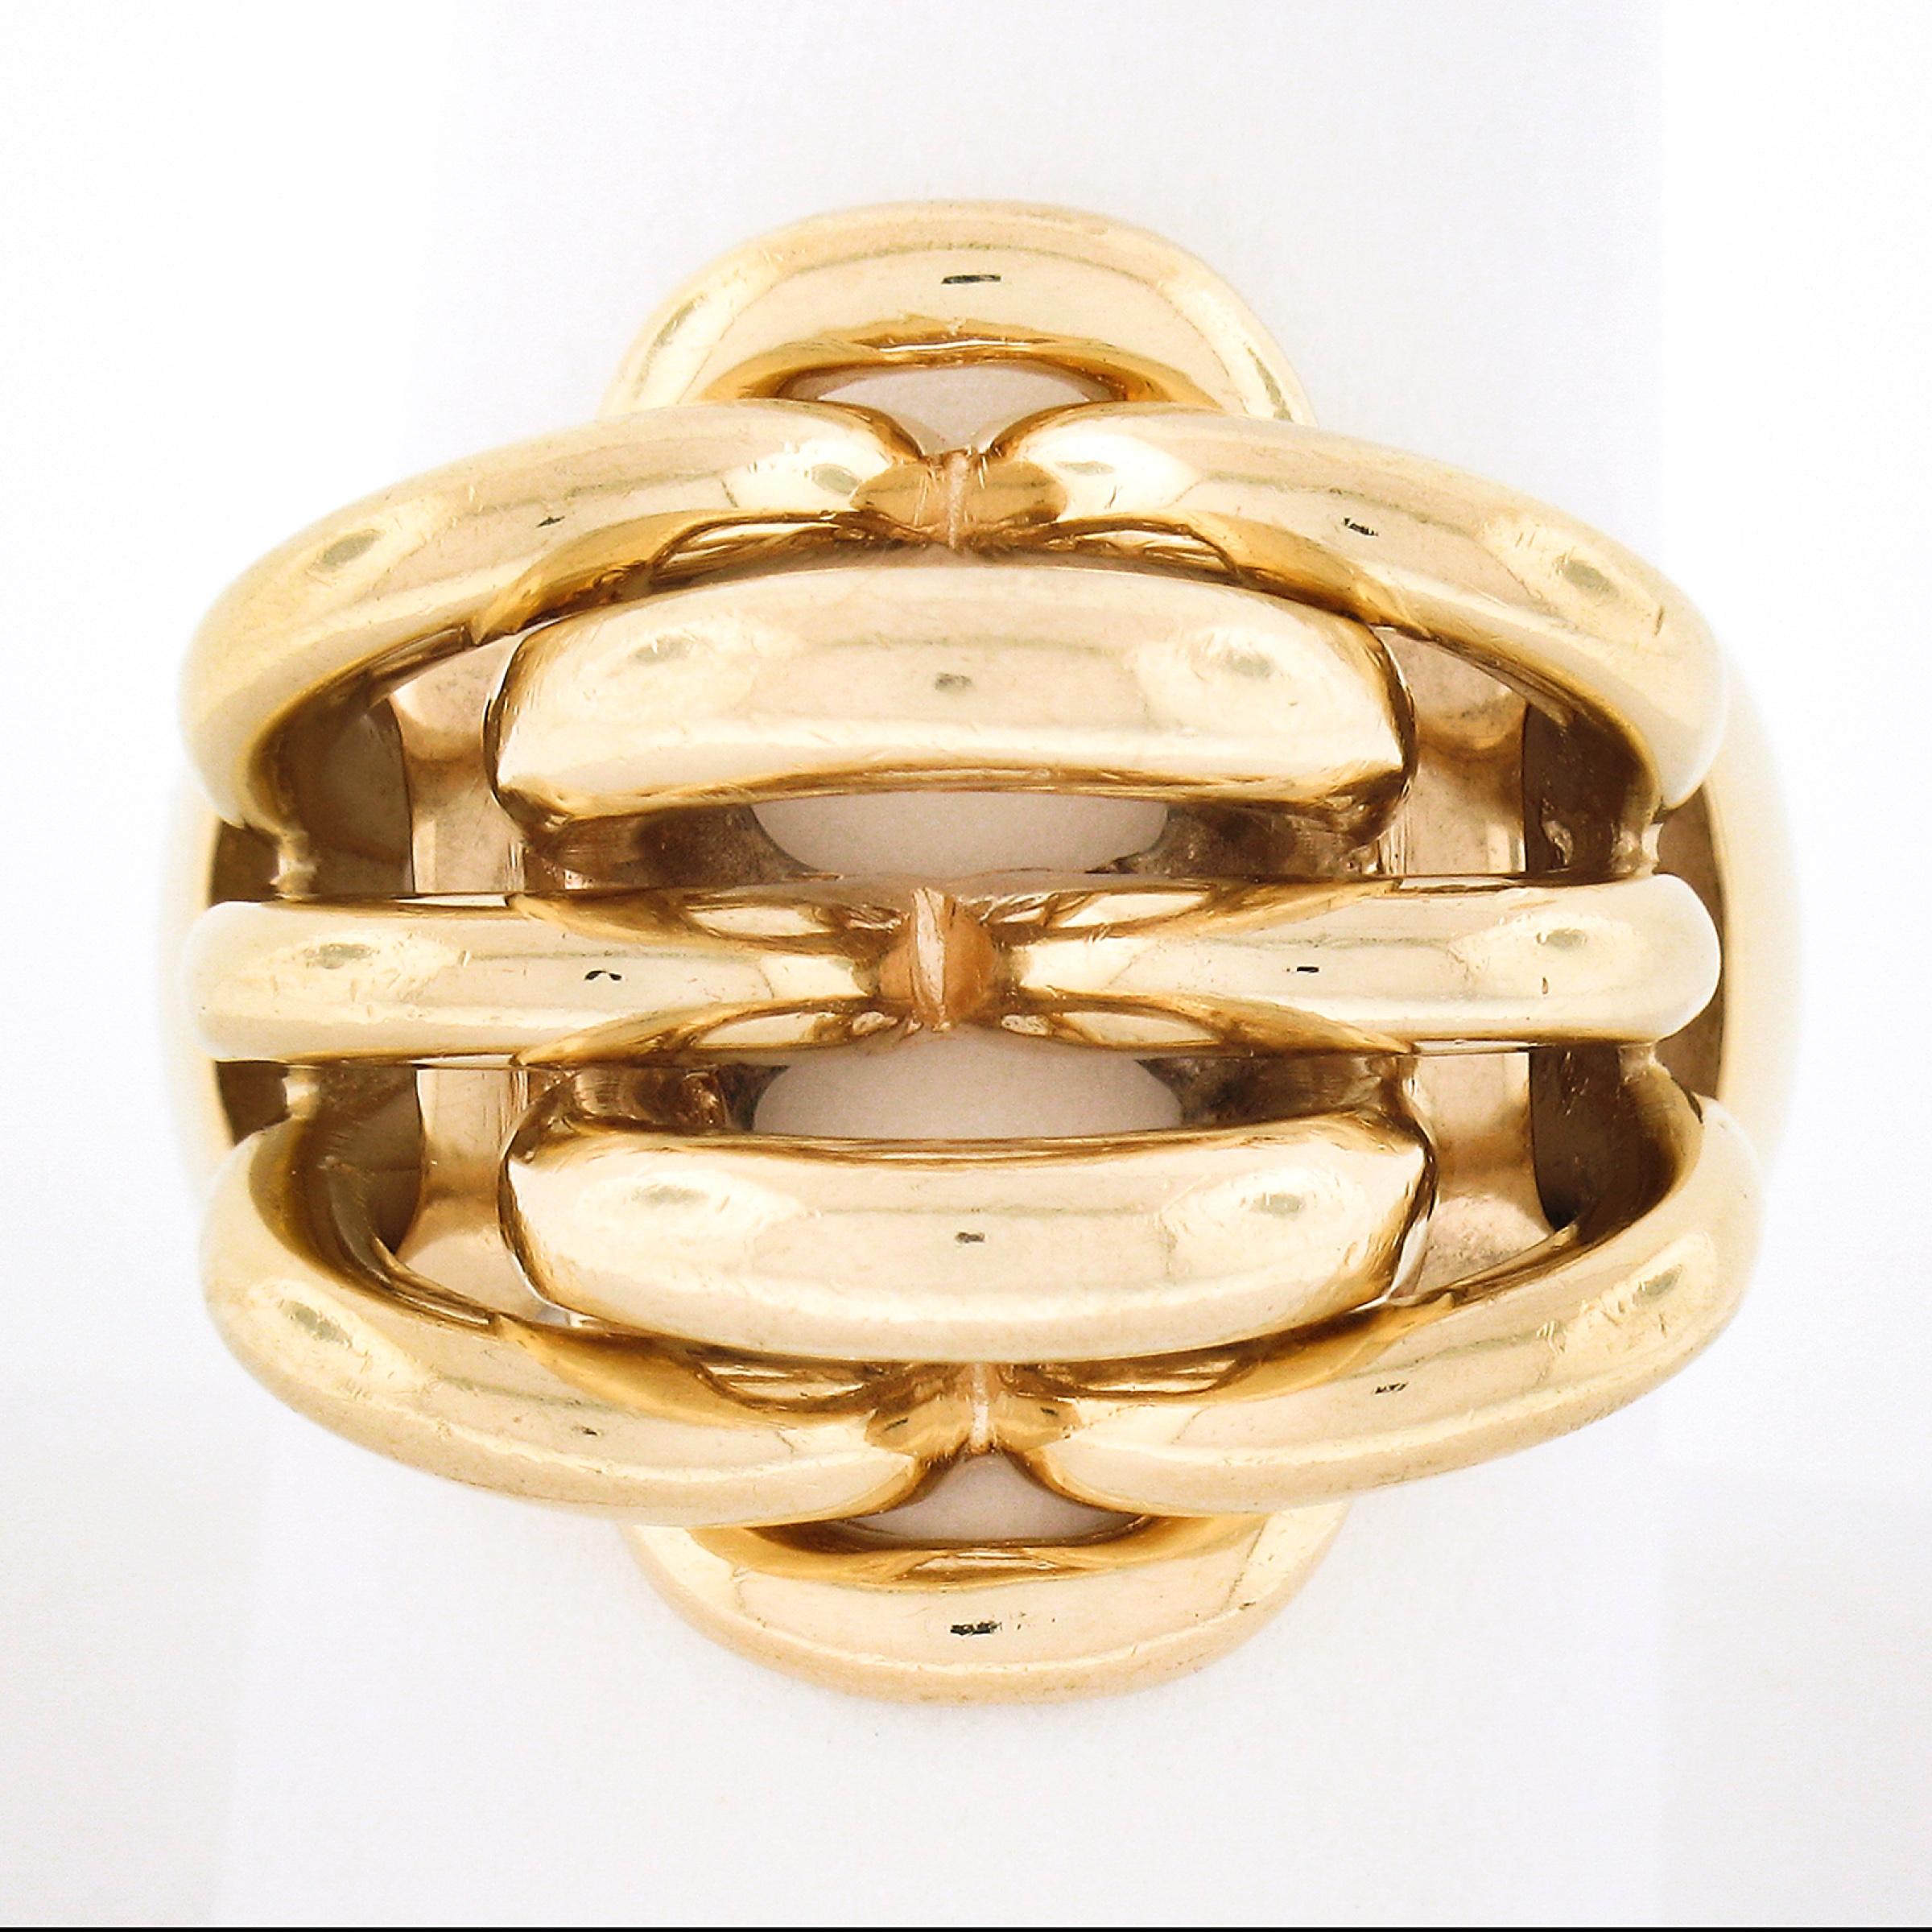 This bold and unique Retro Tiffany & Co. vintage ring is crafted in solid 14k rosy yellow gold. It features a highly polished interlocking woven pattern. The wide ring comes in excellent overall condition and it will definitely make a beautiful add